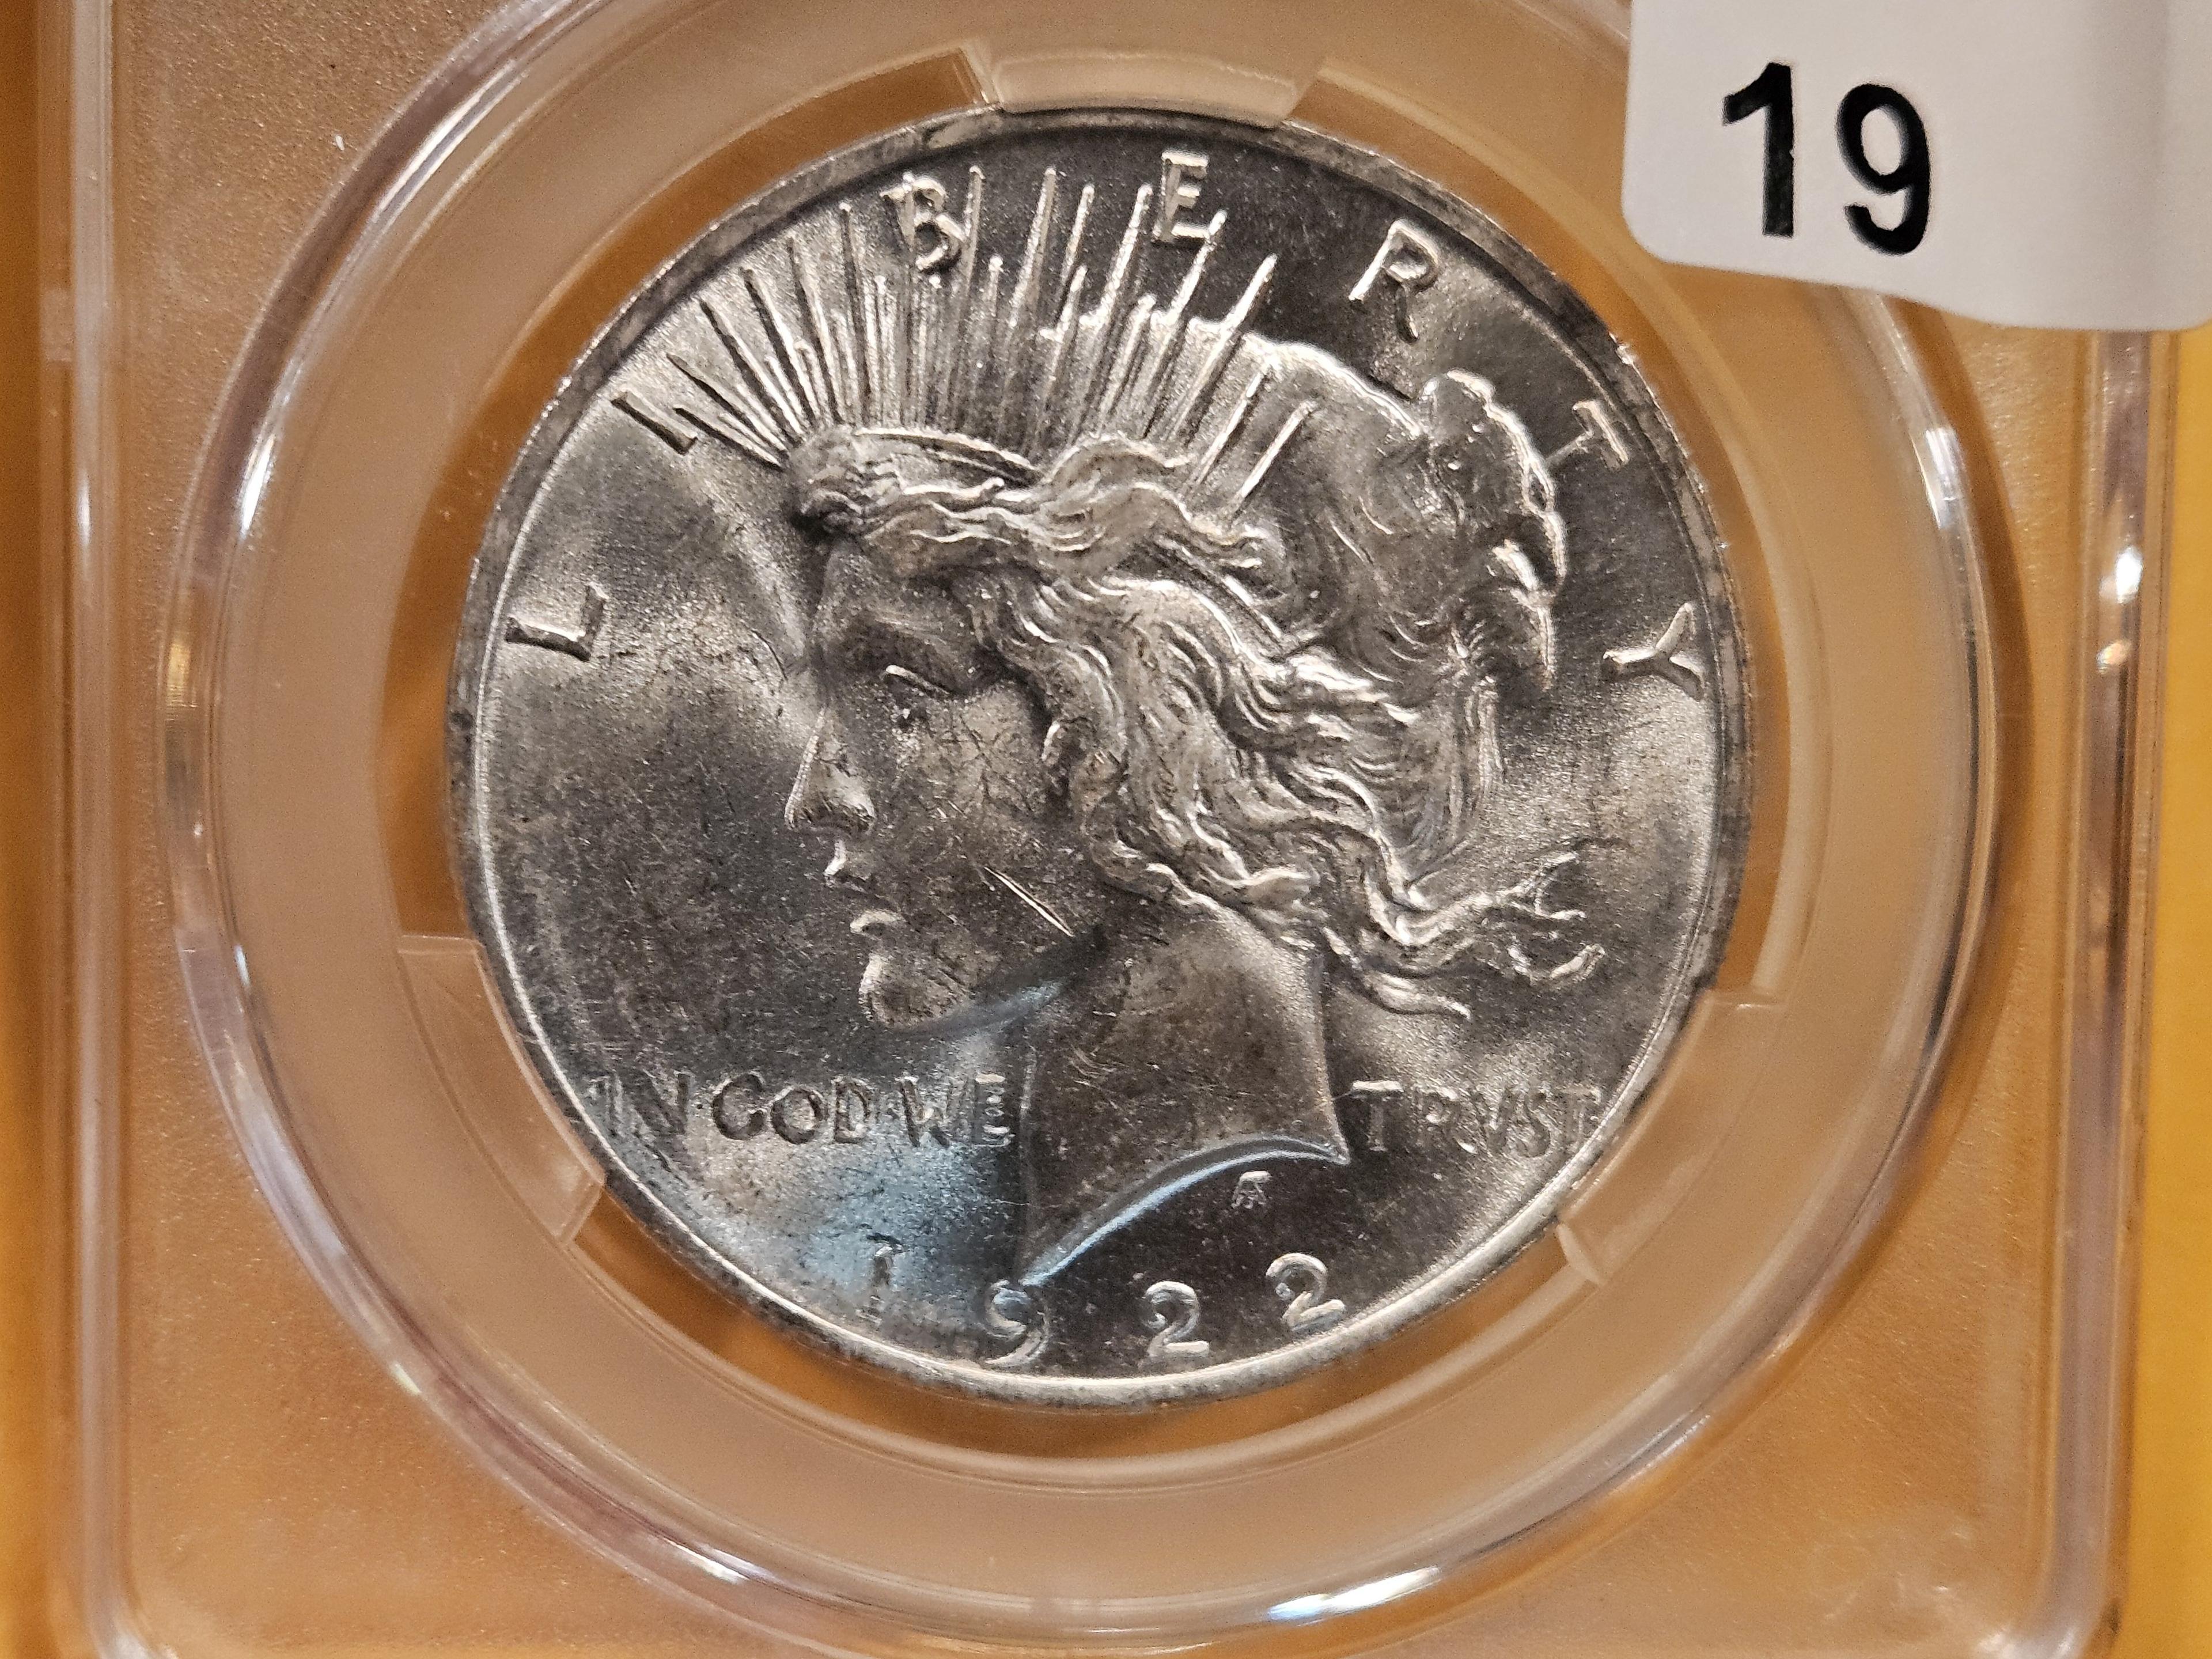 CAC! 1922 Peace Dollar in Mint State 62